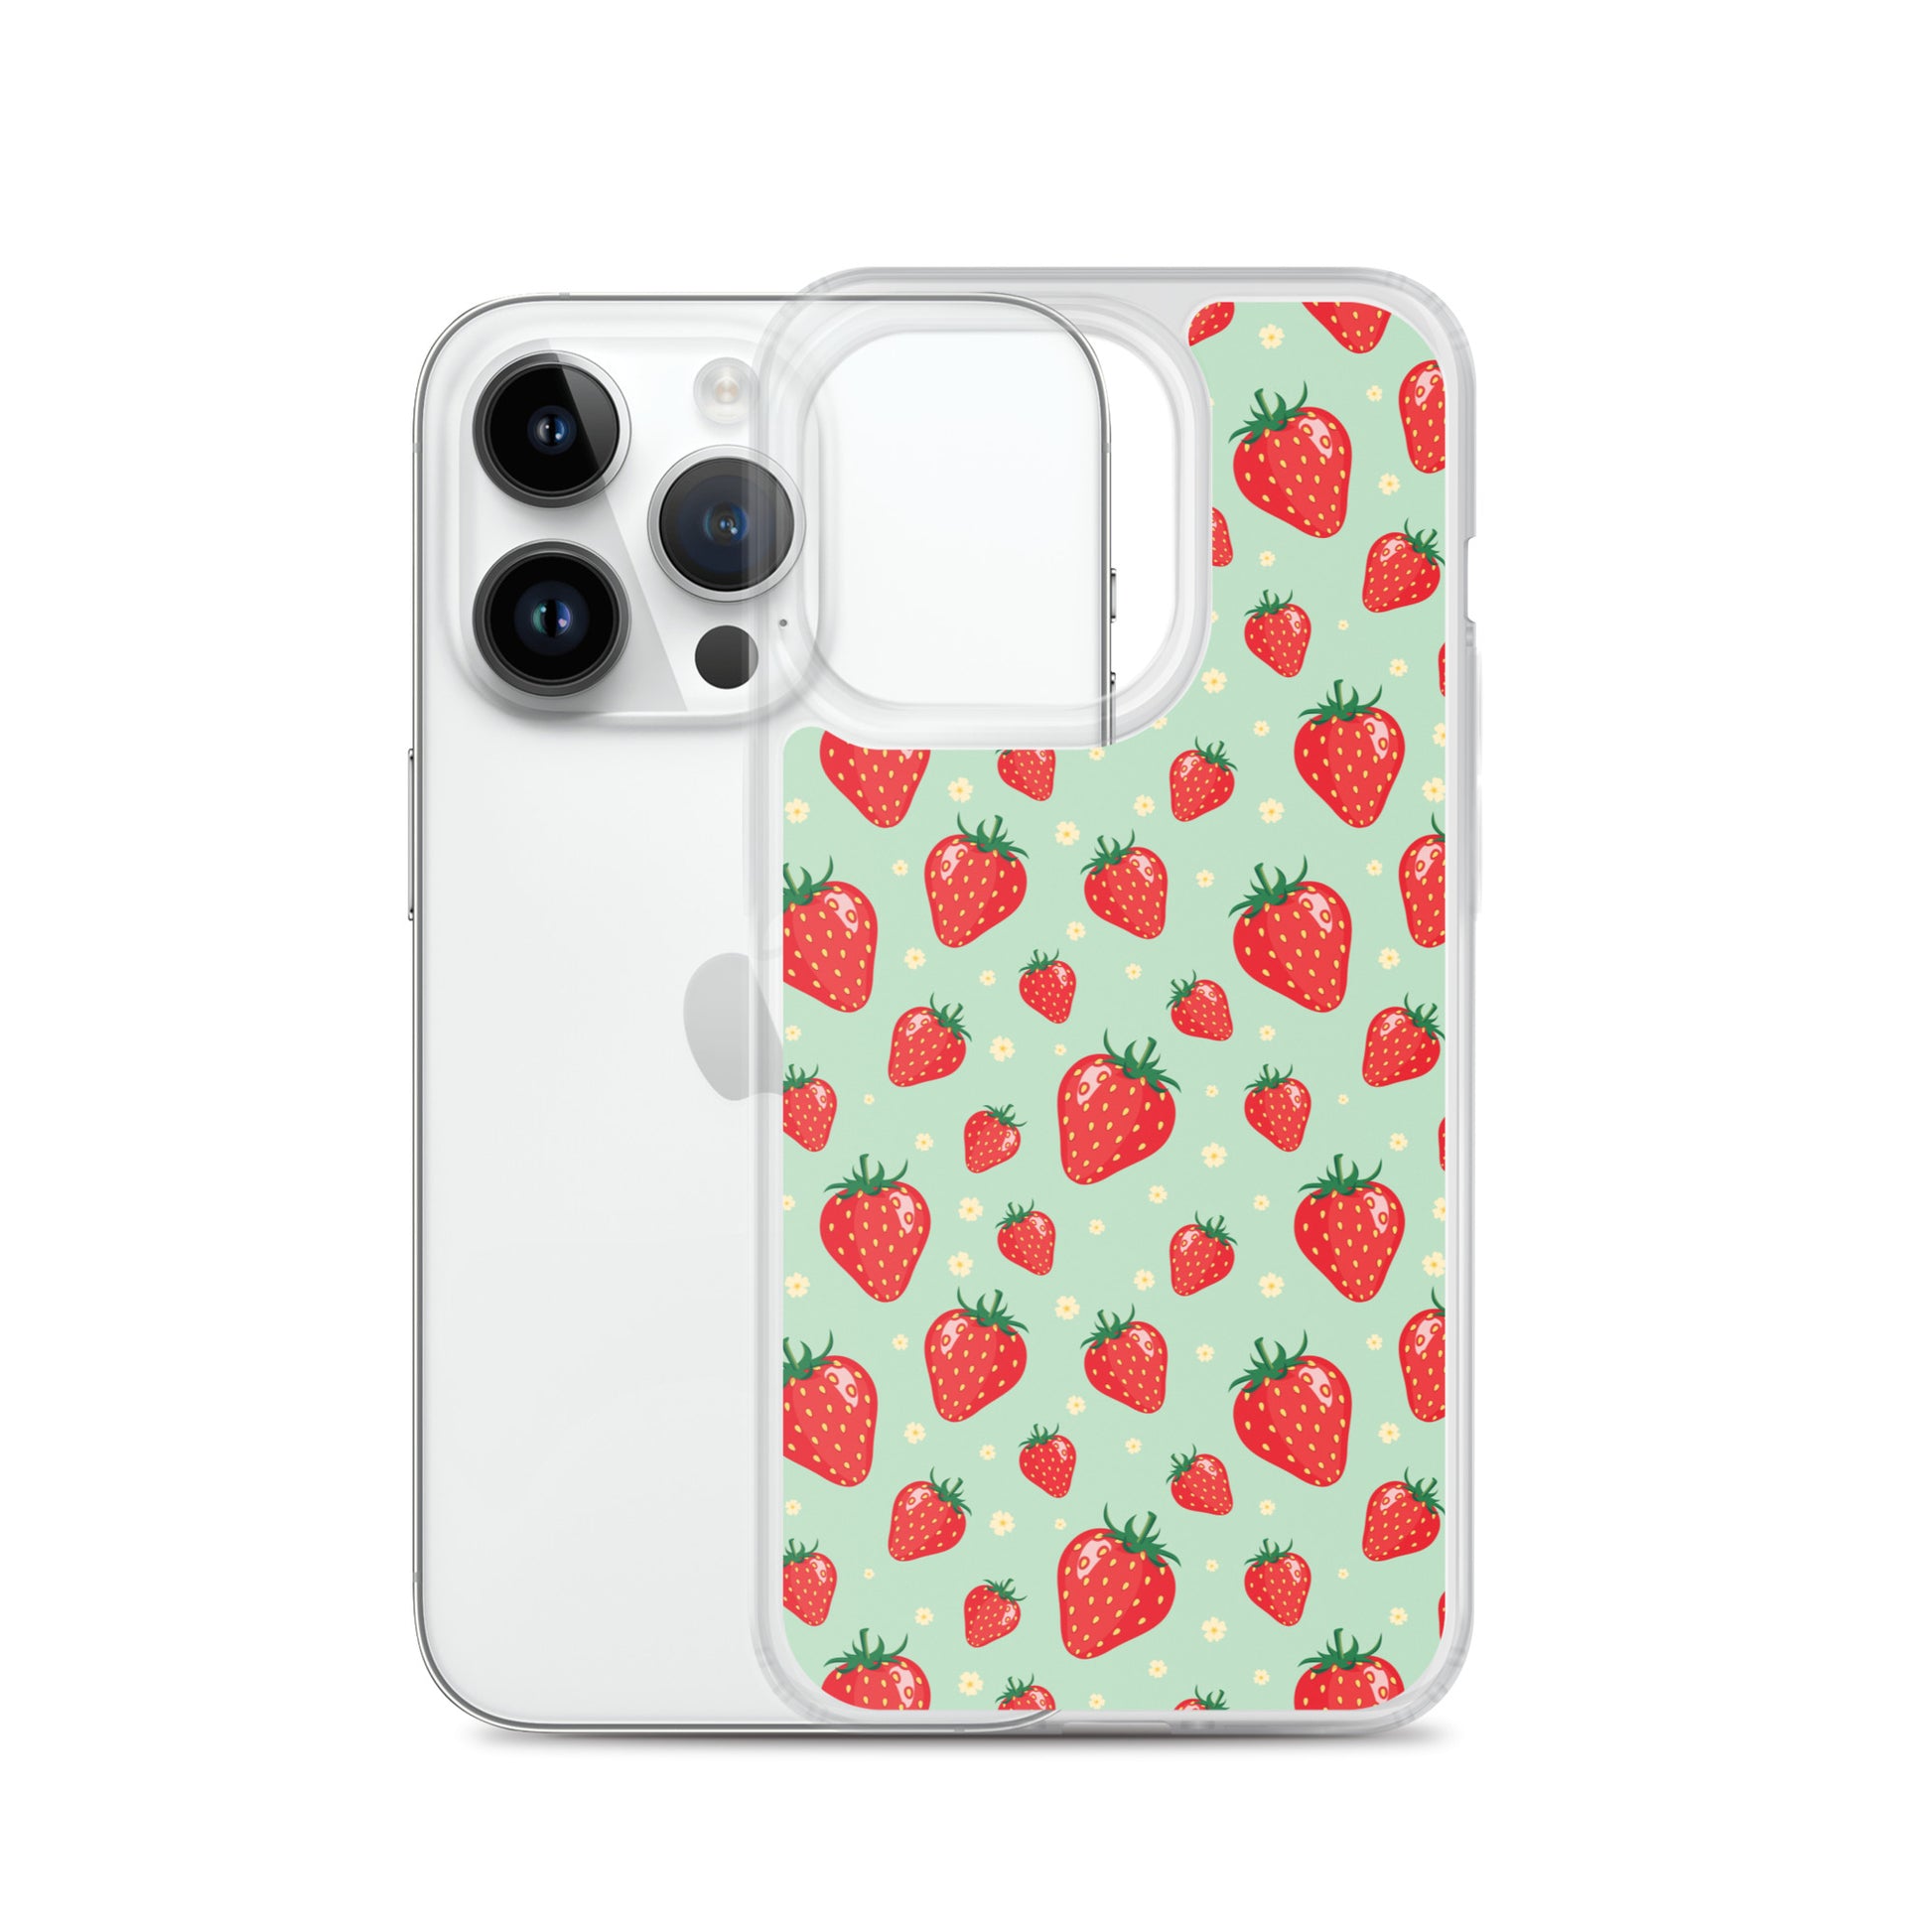 Cute Checkered Flowers Phone Case for iPhone 11, 12, 13, 14, Pro Max, 14  Plus, X, XS Max, XR, 12, 13 Mini, 7, 8 Plus